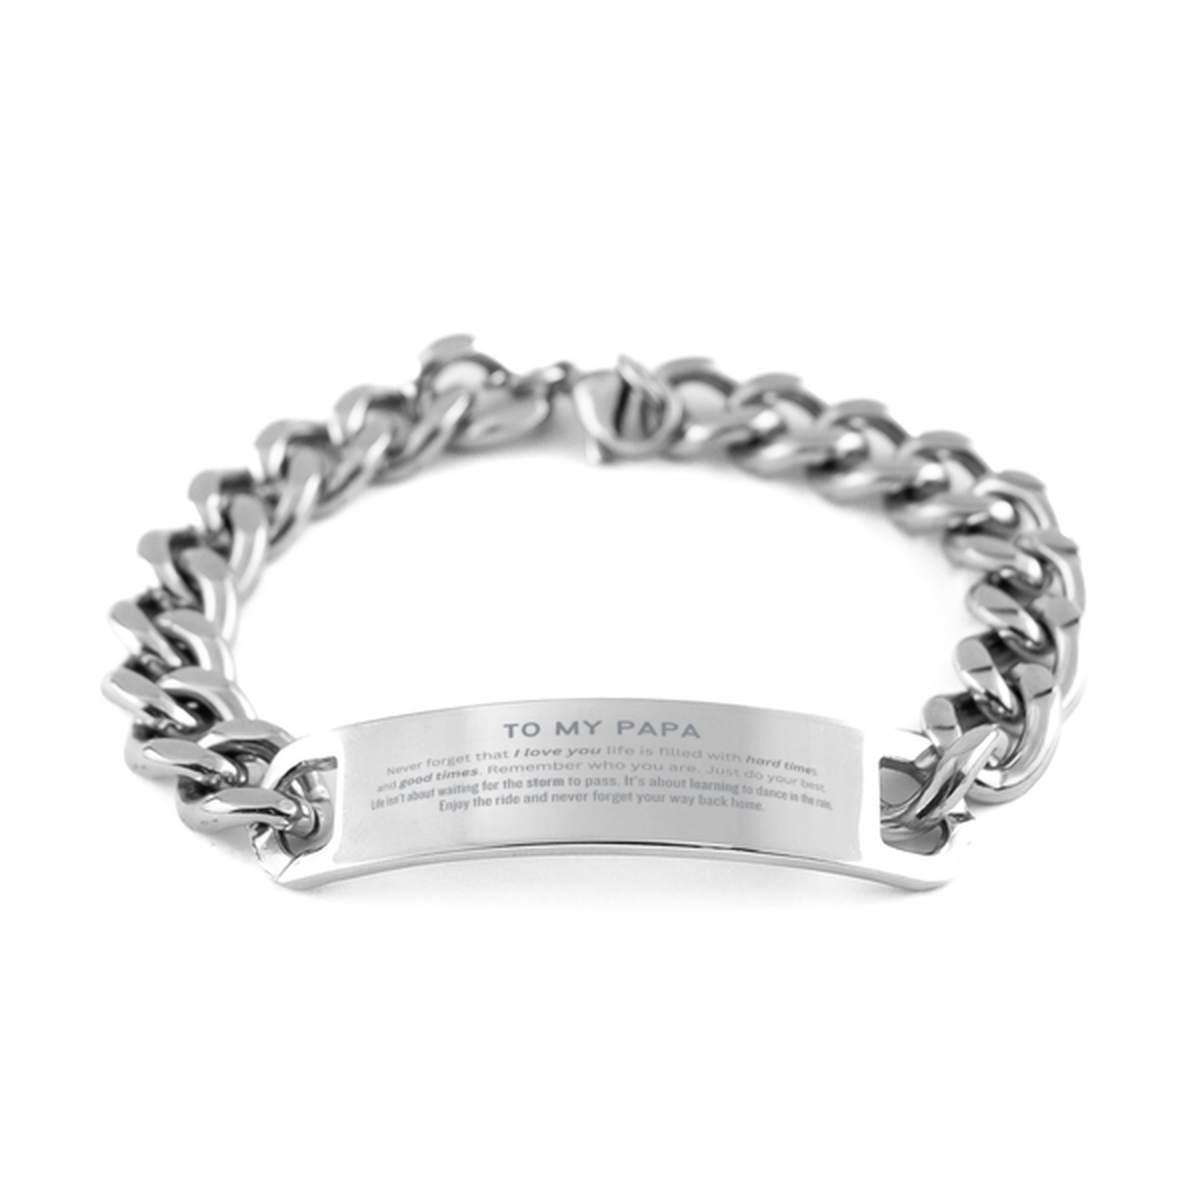 Christmas Papa Cuban Chain Stainless Steel Bracelet Gifts, To My Papa Birthday Thank You Gifts For Papa, Graduation Unique Gifts For Papa To My Papa Never forget that I love you life is filled with hard times and good times. Remember who you are. Just do